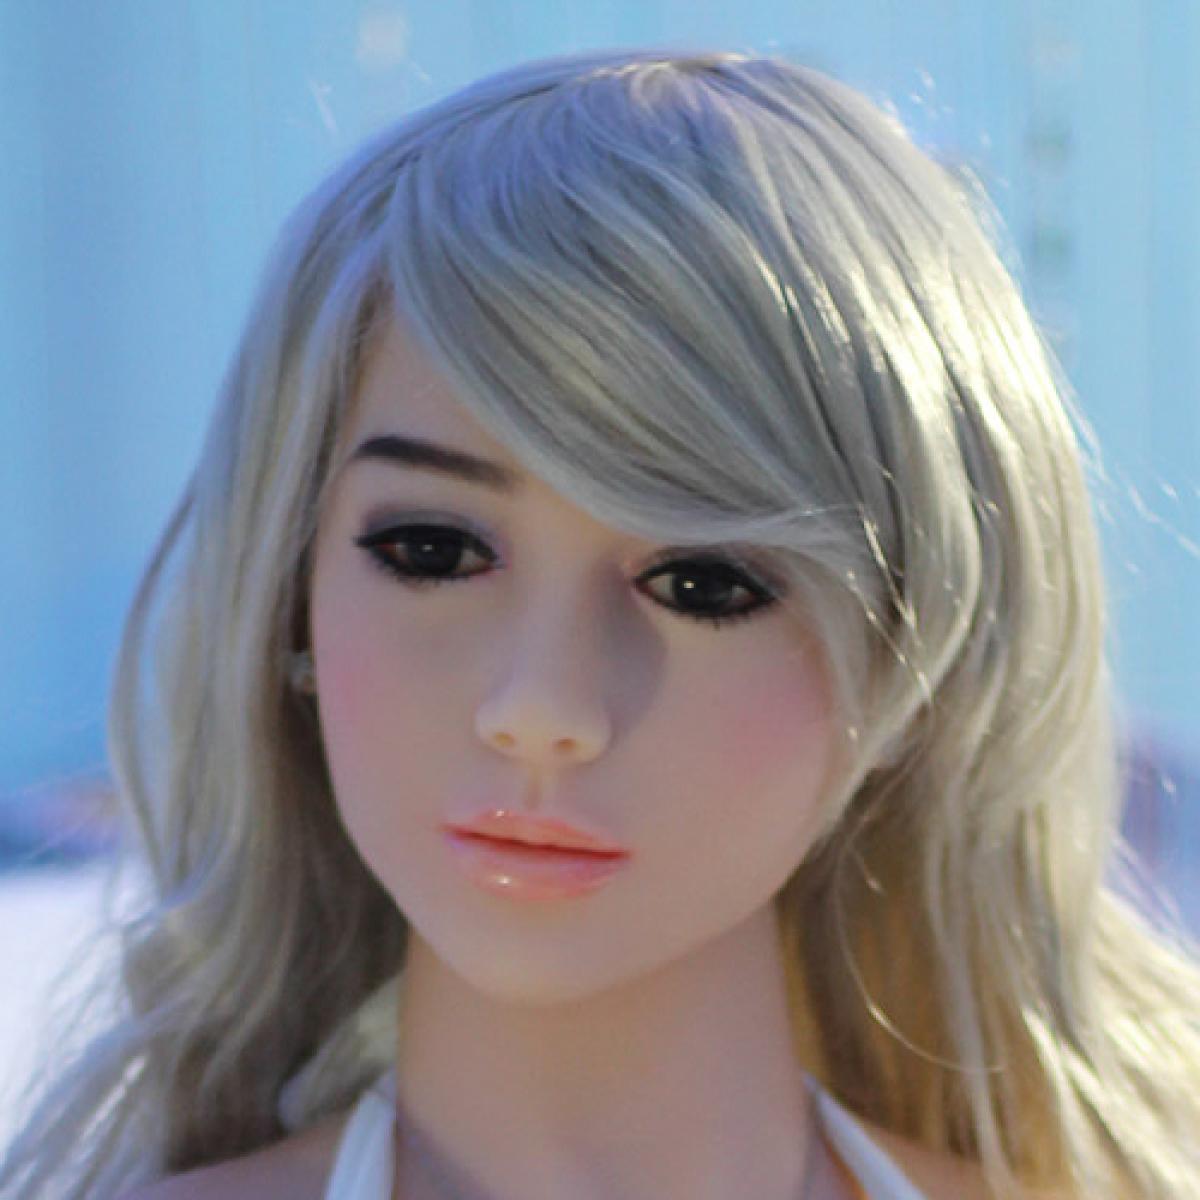 Neodoll Luxury Julie - Sex Doll Head - M16 Compatible - Natural